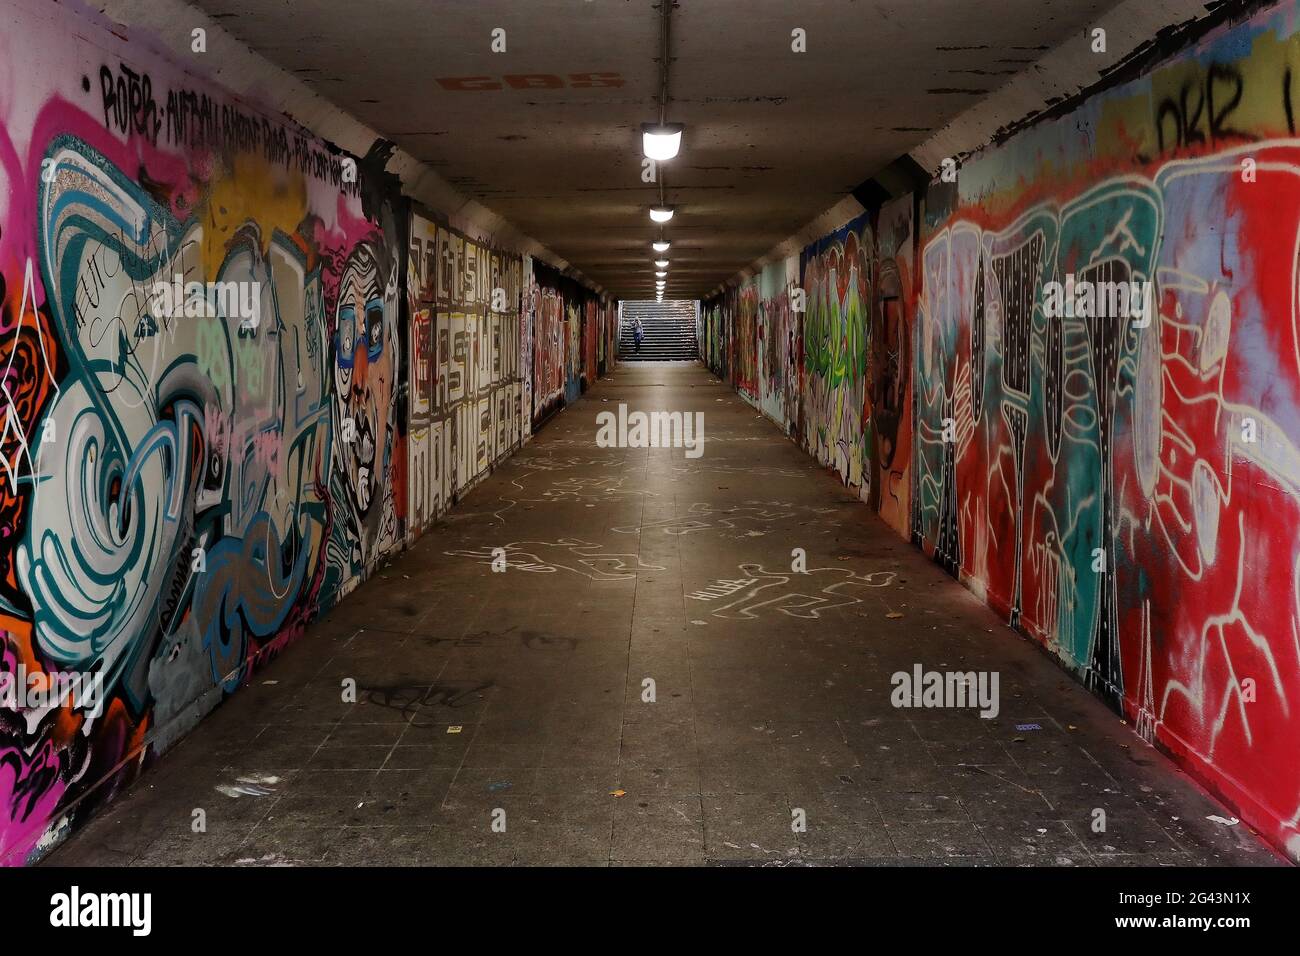 Menacing, dirty and long pedestrian tunnel with graffiti, Bochum, Ruhr area, Germany, Europe Stock Photo